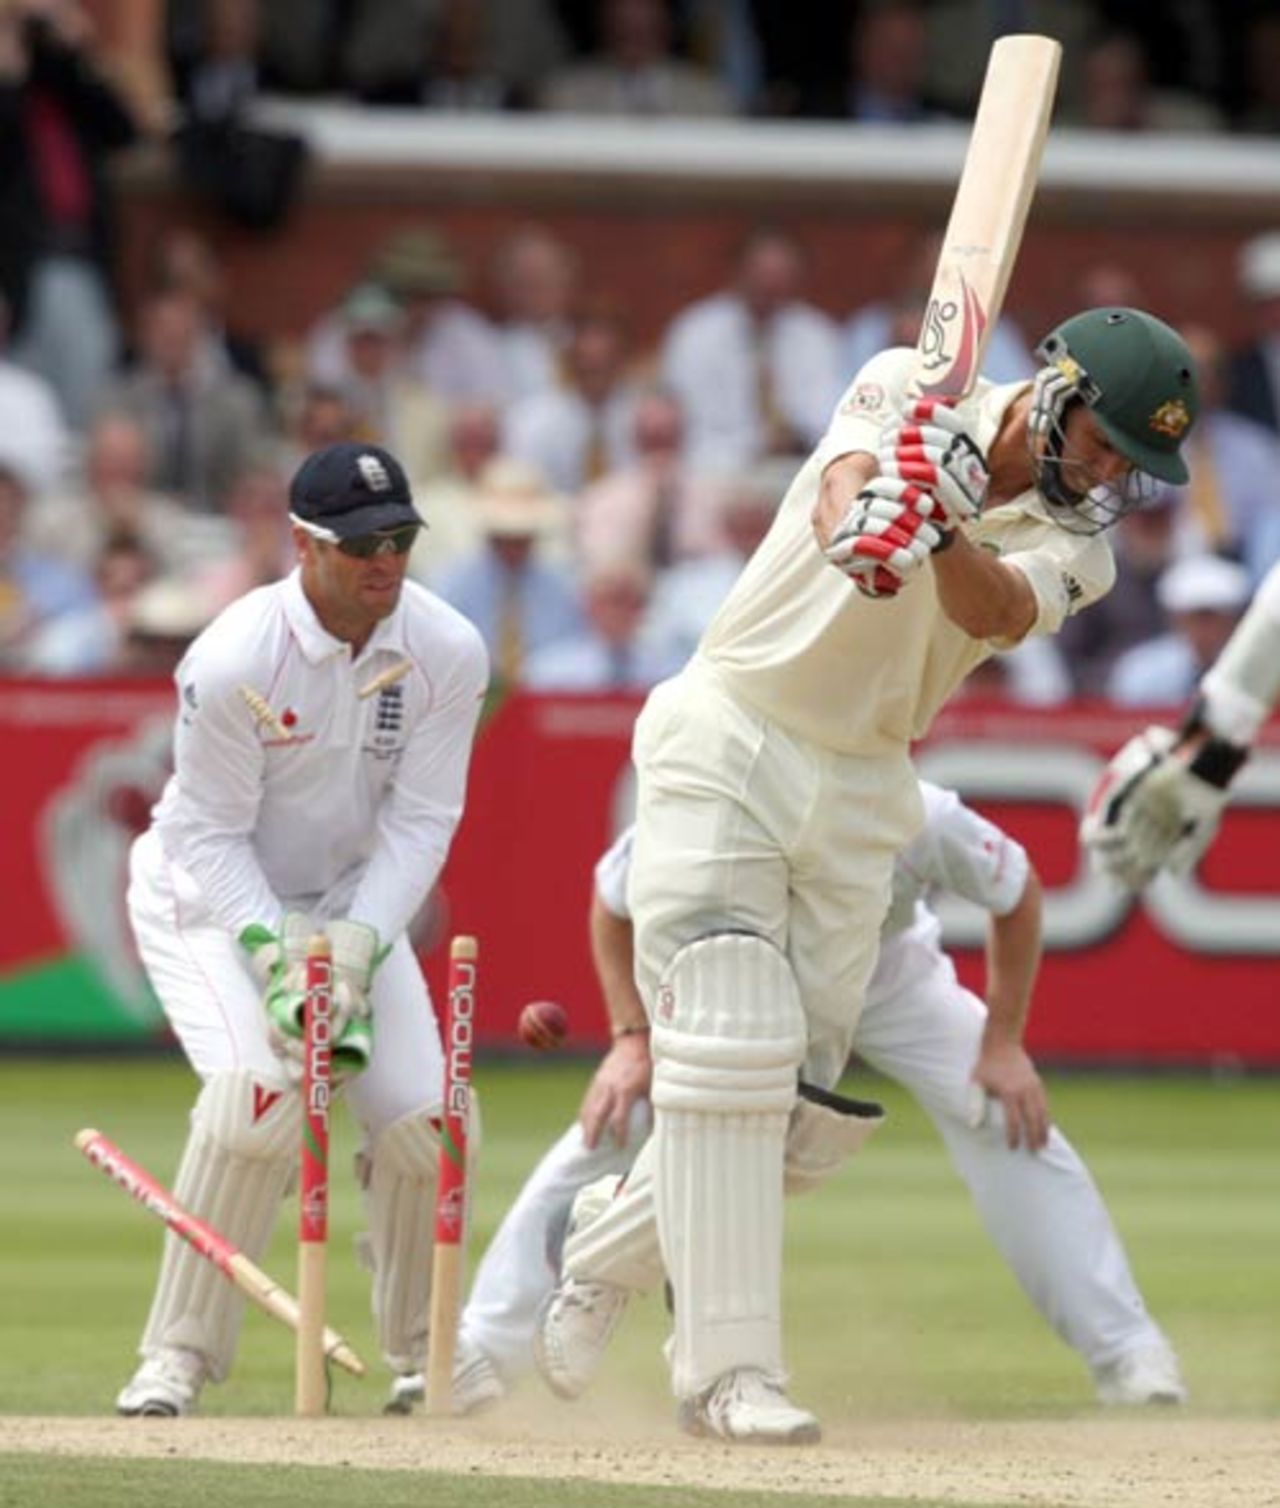 Mitchell Johnson is bowled by Graeme Swann, the final wicket in England's victory, England v Australia, 2nd Test, Lord's, 5th day, July 20, 2009